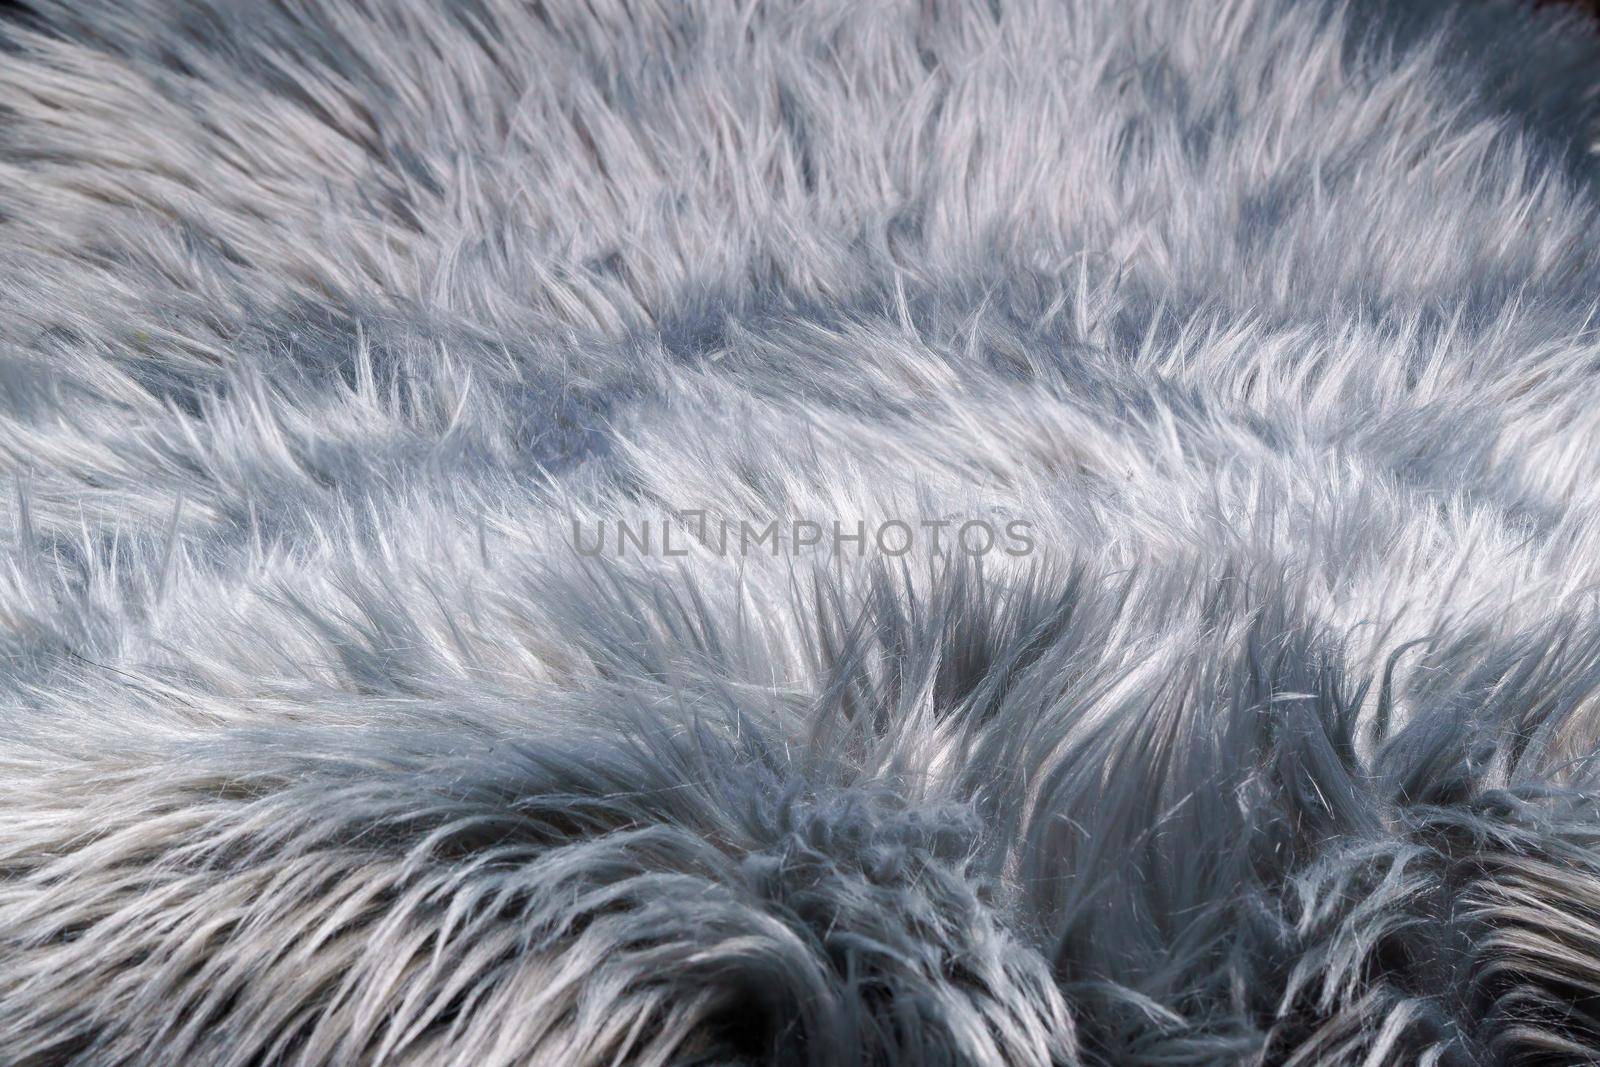 A fur-like silver gray carpet structure, close-up by silent303